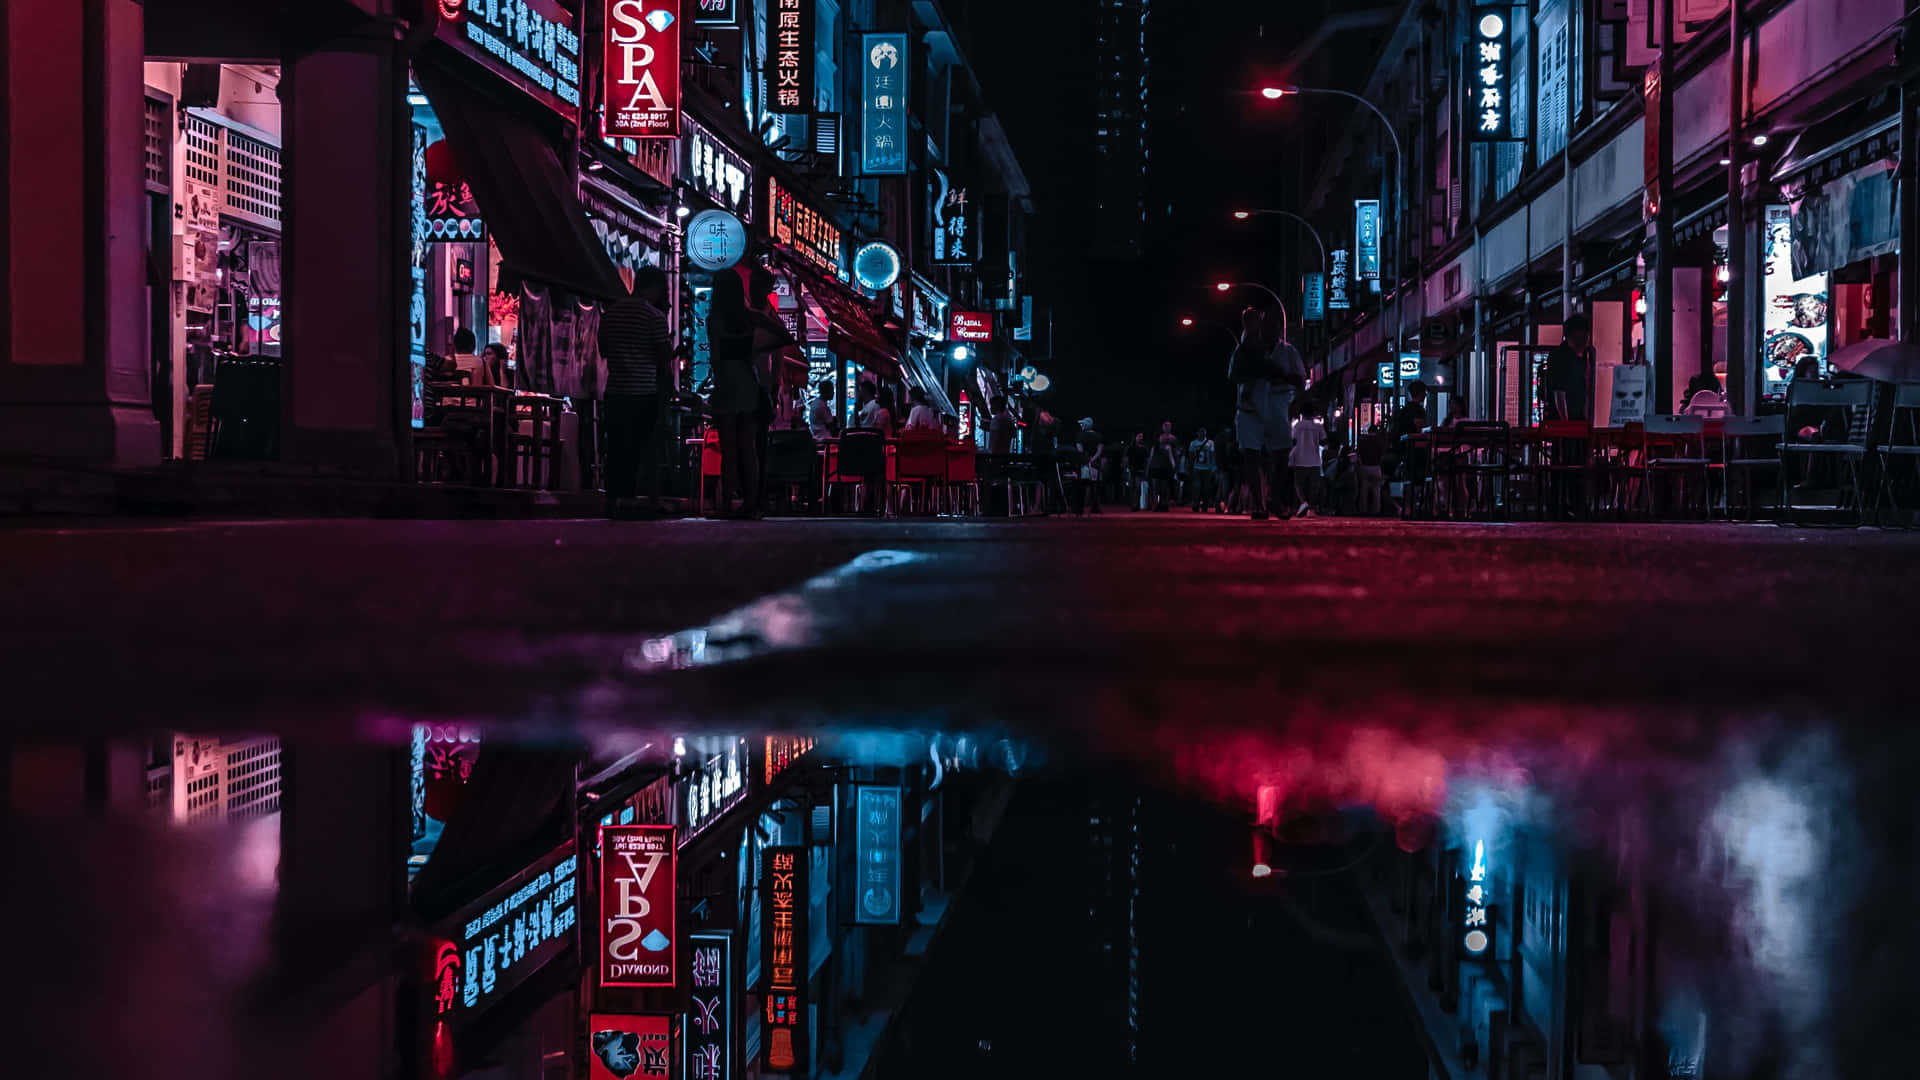 "The bright, bold lights of the city after dark" Wallpaper